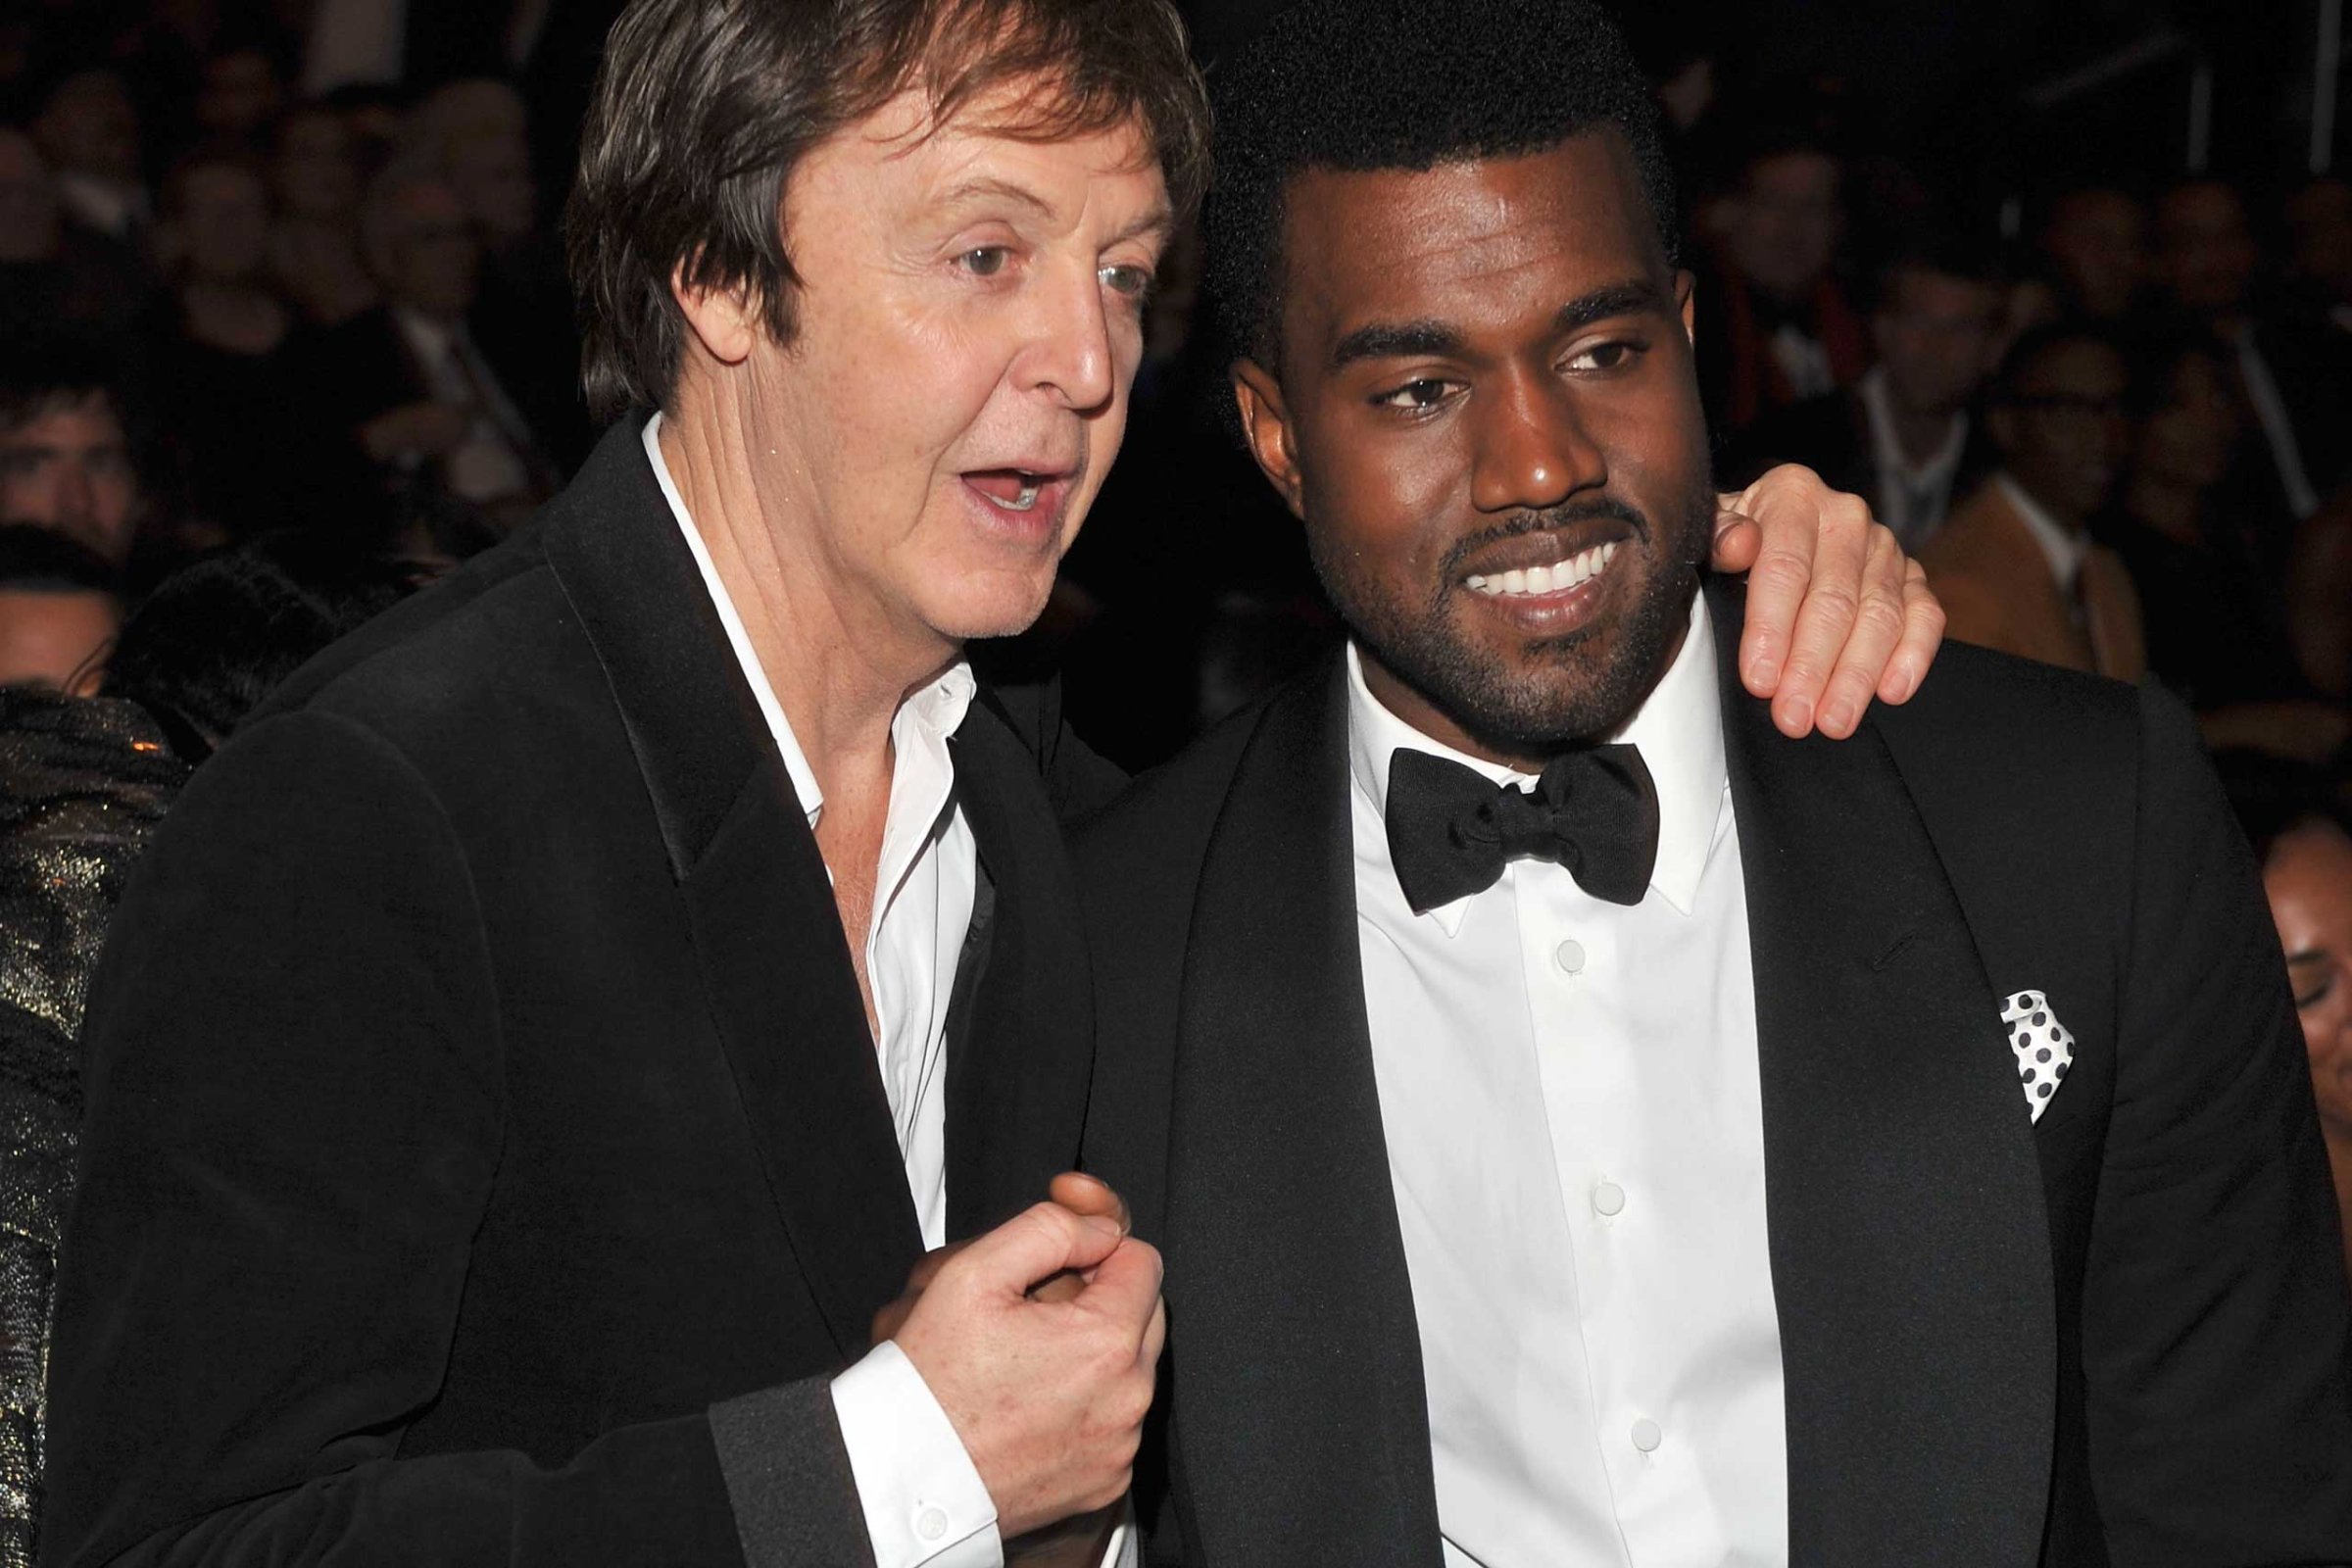 Musicians Paul McCartney and Kanye West together at the Grammy's in 2009.